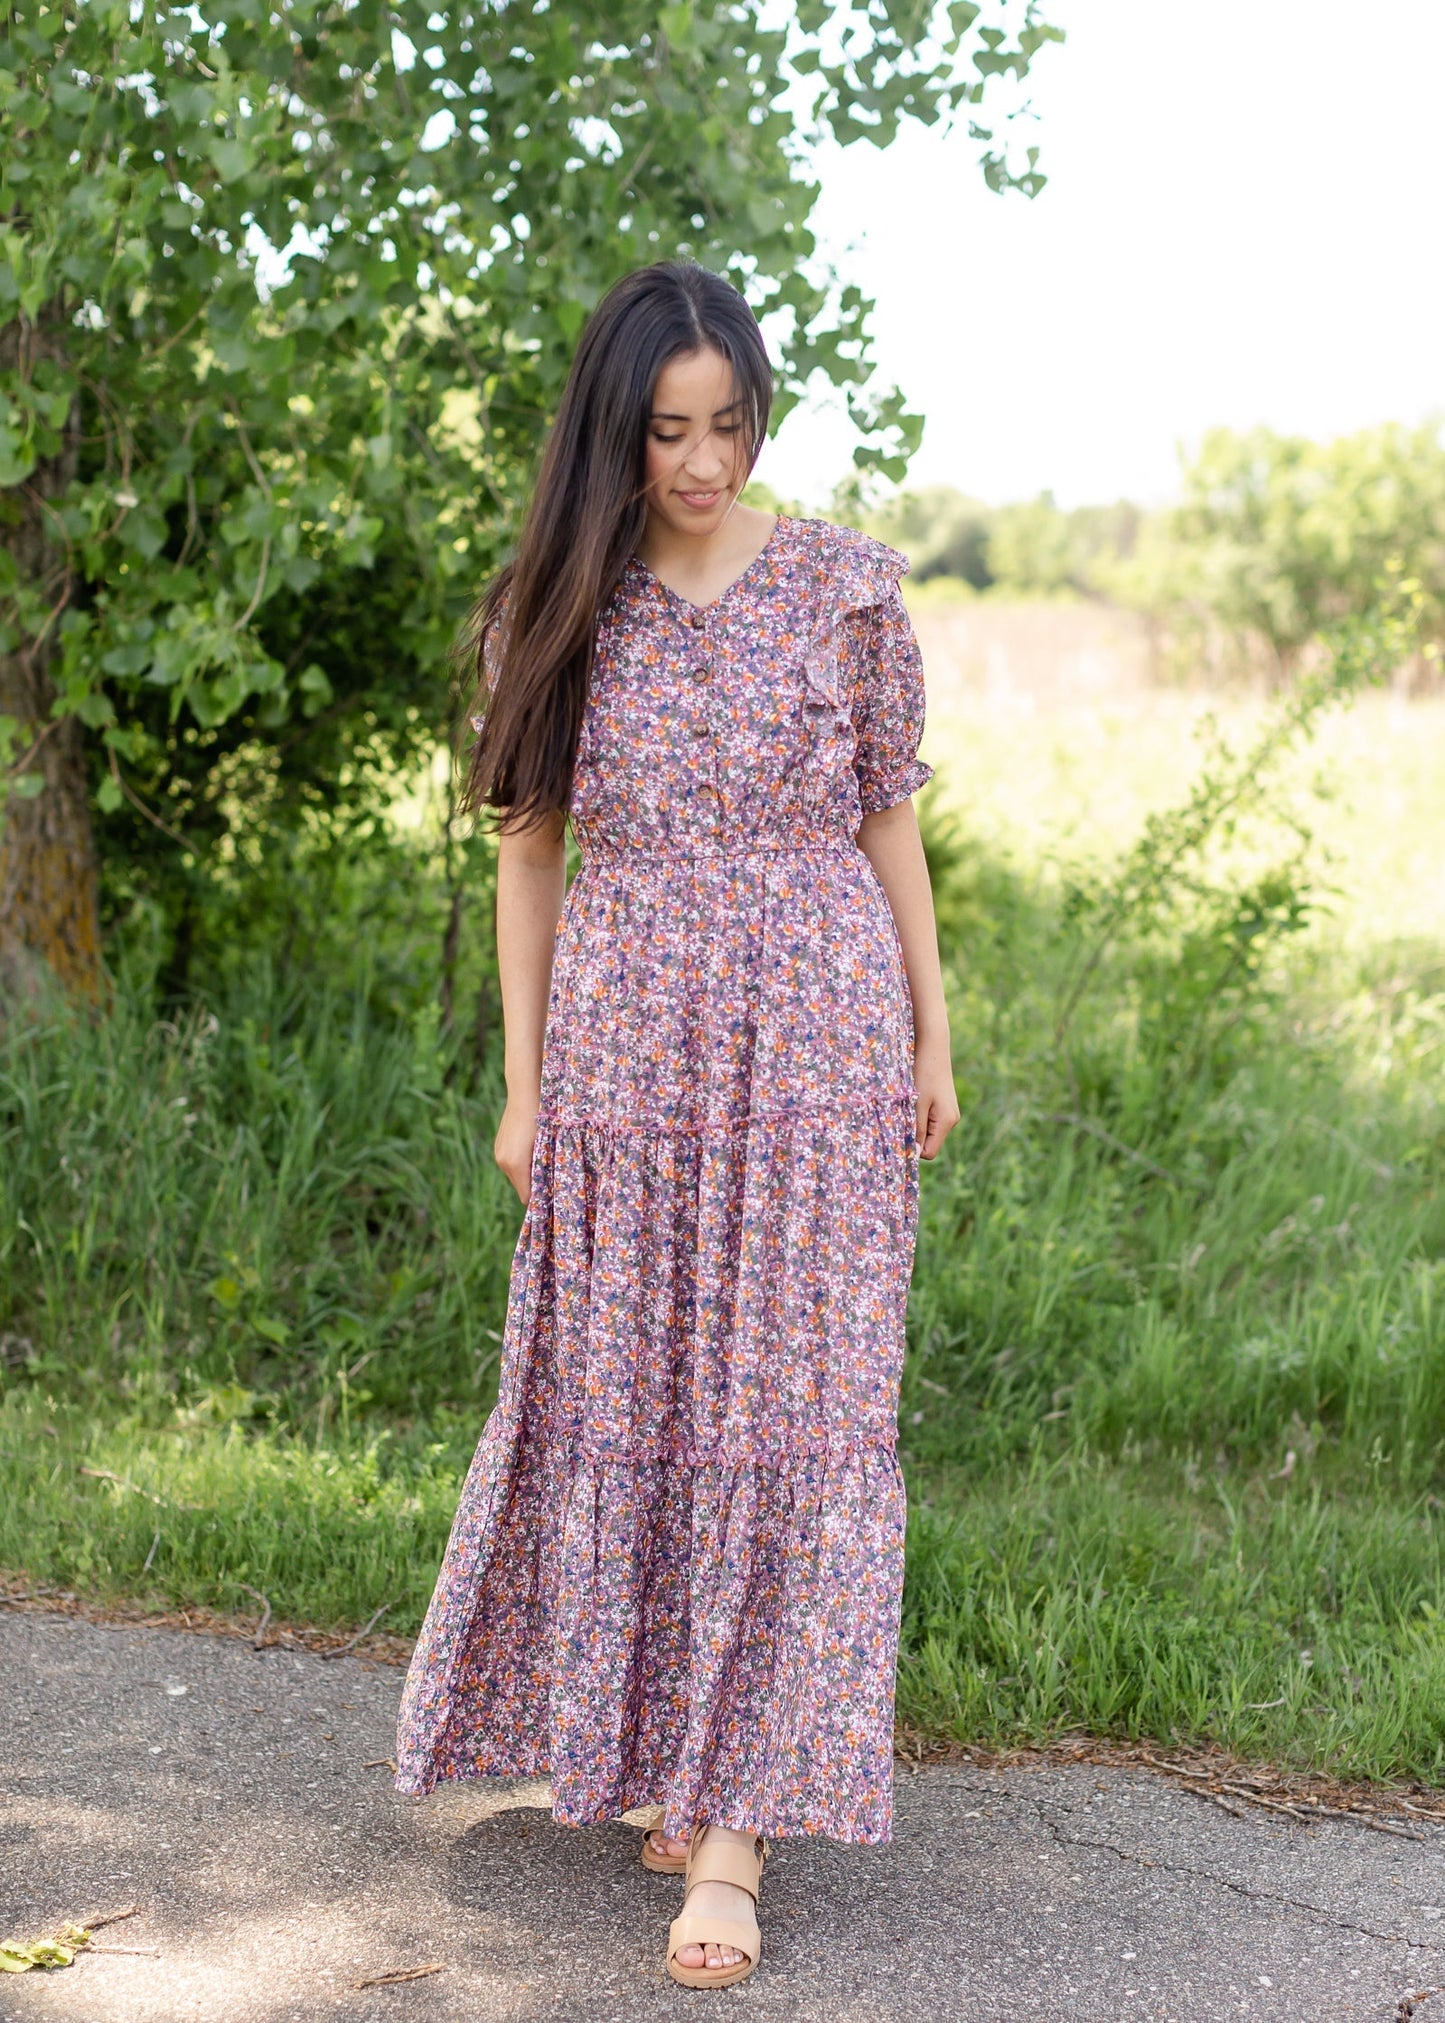 Ruffled Ditsy Floral Button Maxi Dress - FINAL SALE Dresses